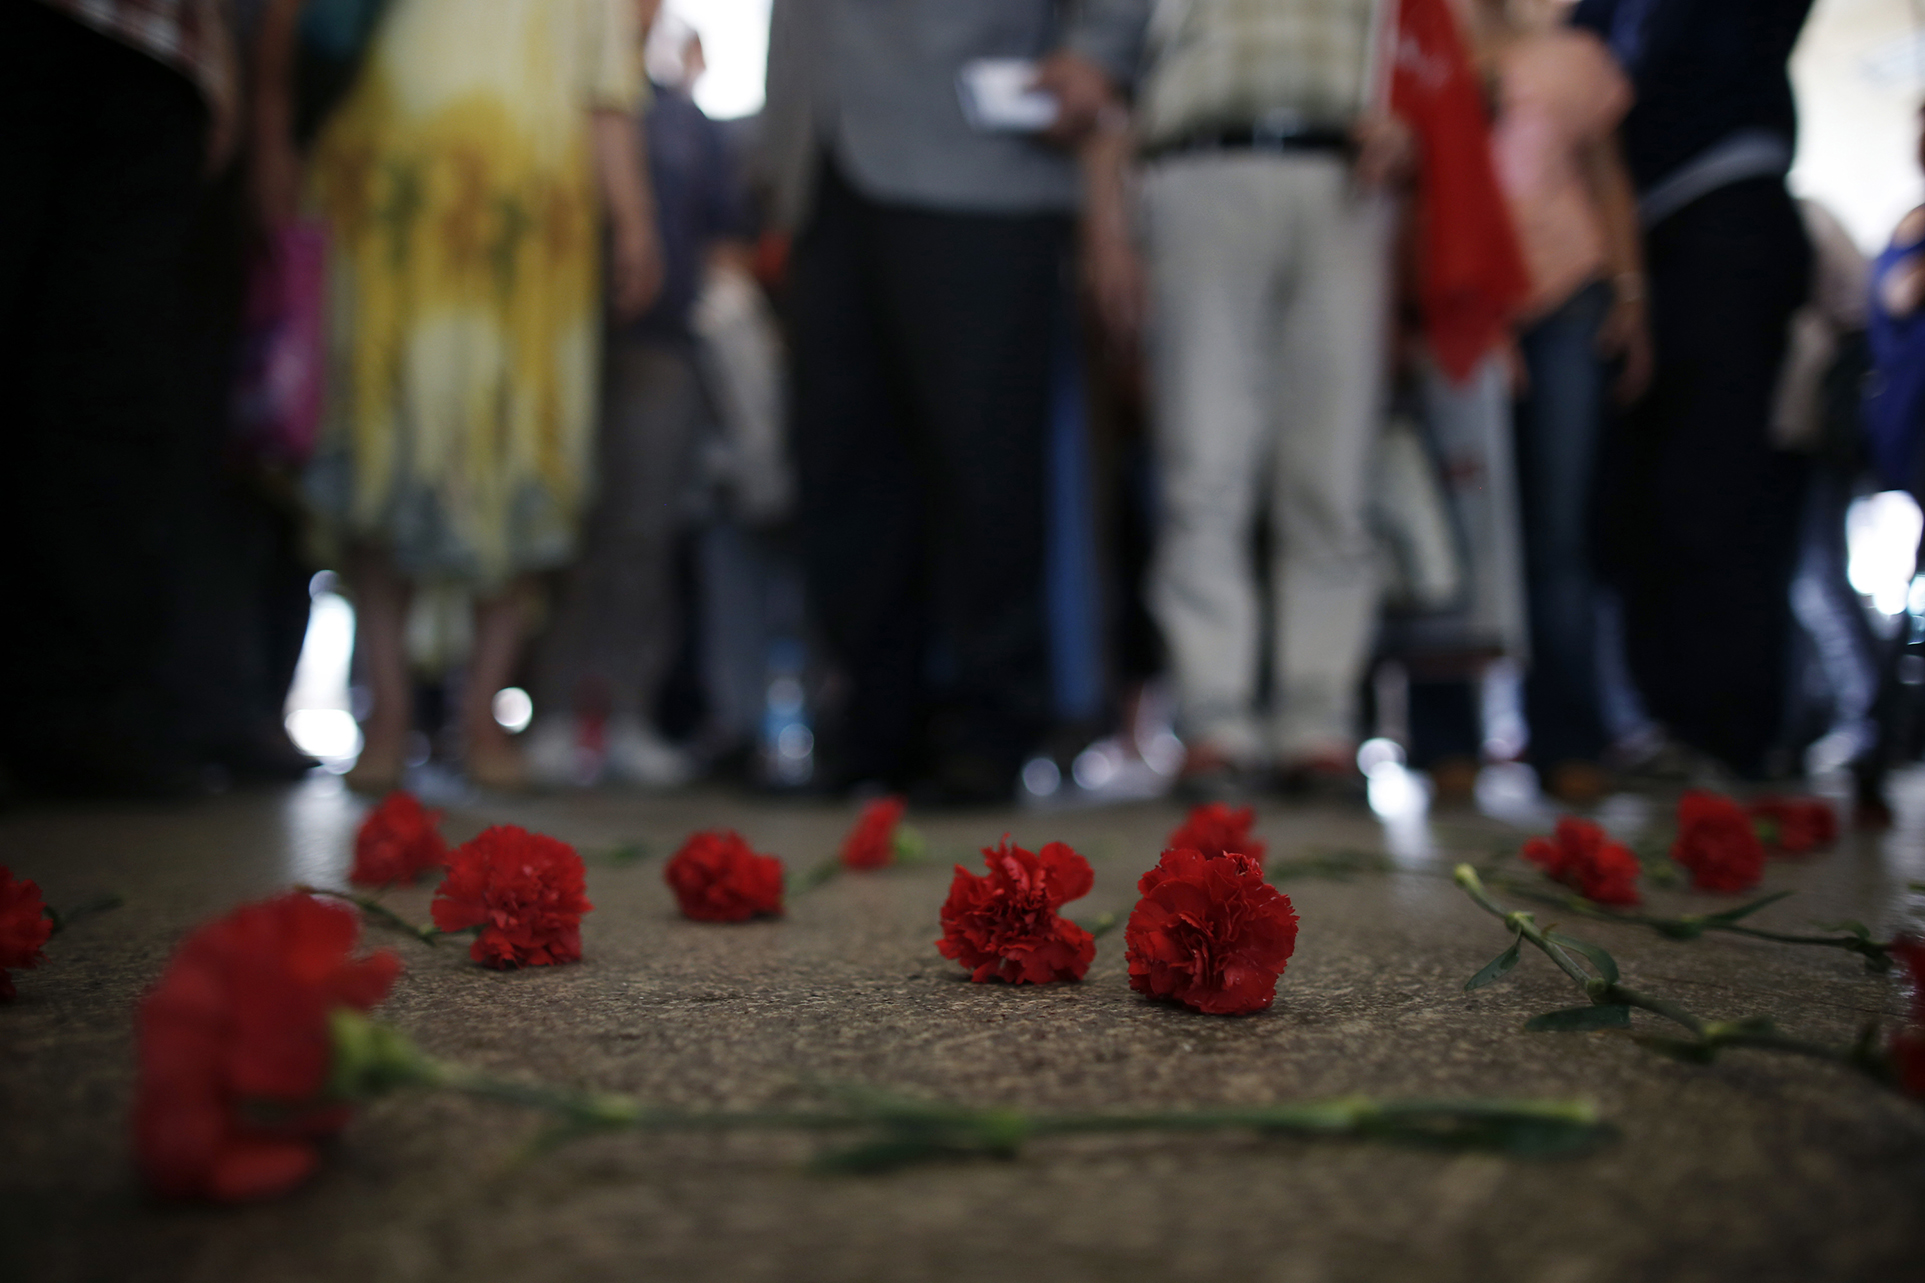 Colleagues leave carnations for Erol Eskisoy and Ali Zulfukar Yorulmaz, two taxi drivers killed in Tuesday's blasts at the entrance of Ataturk Airport in Istanbul, Thursday, June 30, 2016. A senior Turkish official on Thursday identified the Istanbul airport attackers as a Russian, Uzbek and Kyrgyz national hours after police carried out sweeping raids across the city looking for Islamic State suspects. (AP Photo/Emrah Gurel)